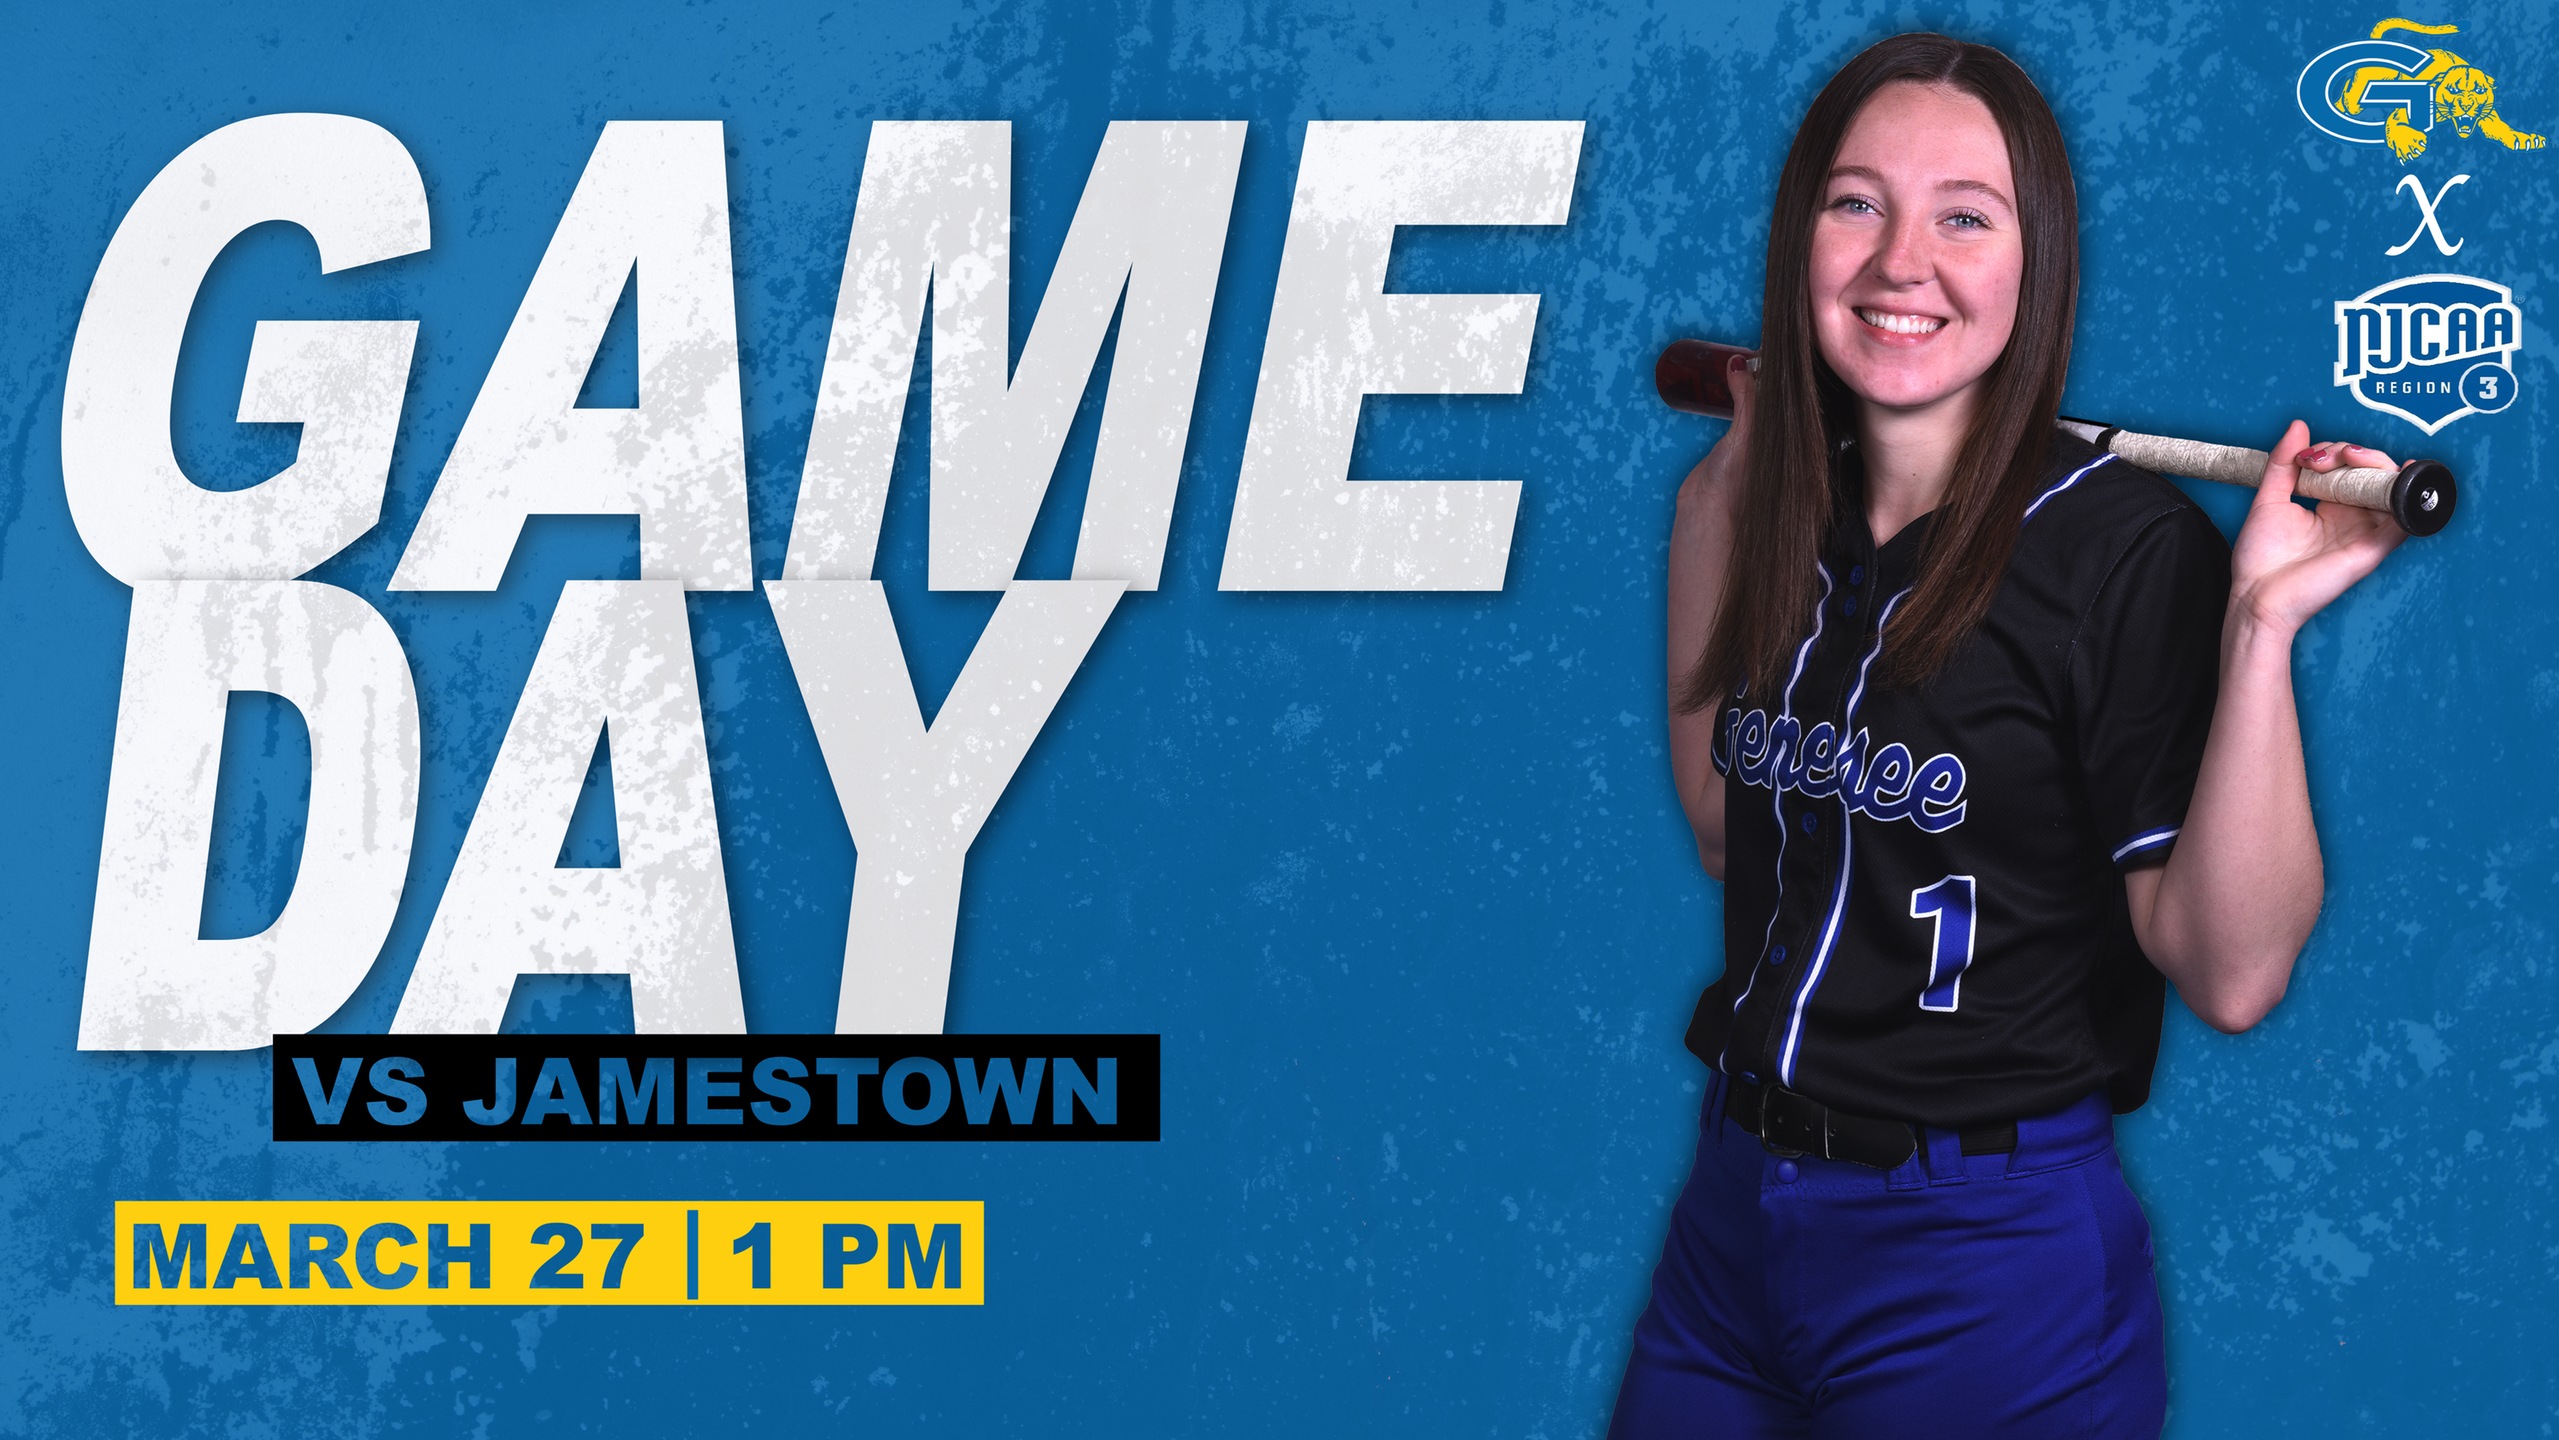 GCC softball takes on Jamestown on March 27 at 1pm